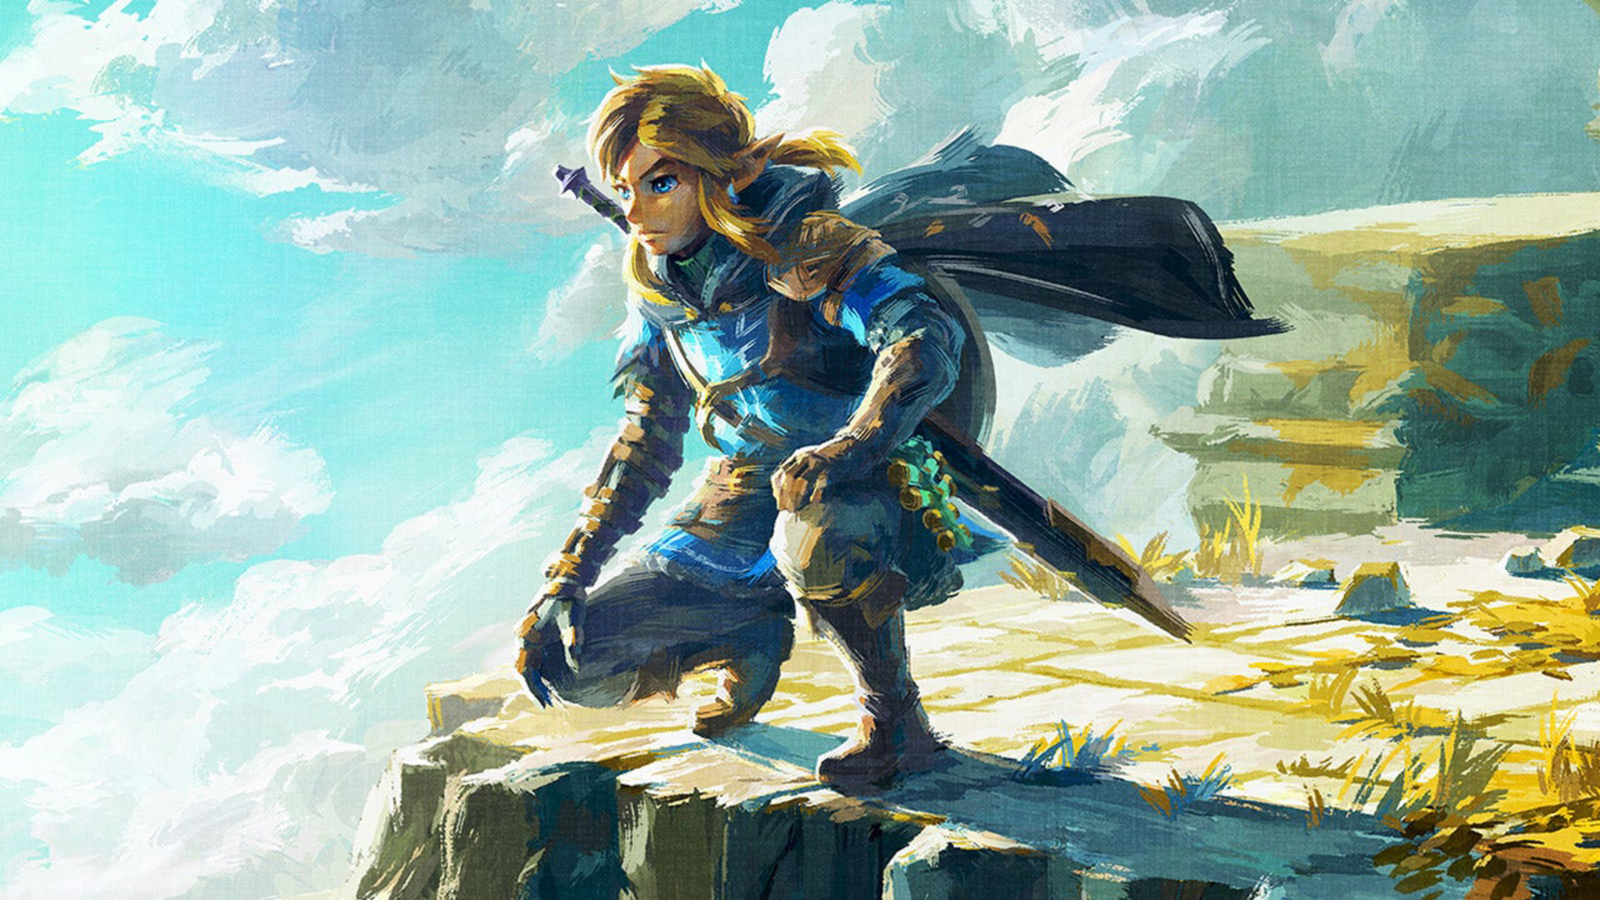 legend of zelda tears of the kingdom switch oled model leaked link looks down as he gets ready for adventure